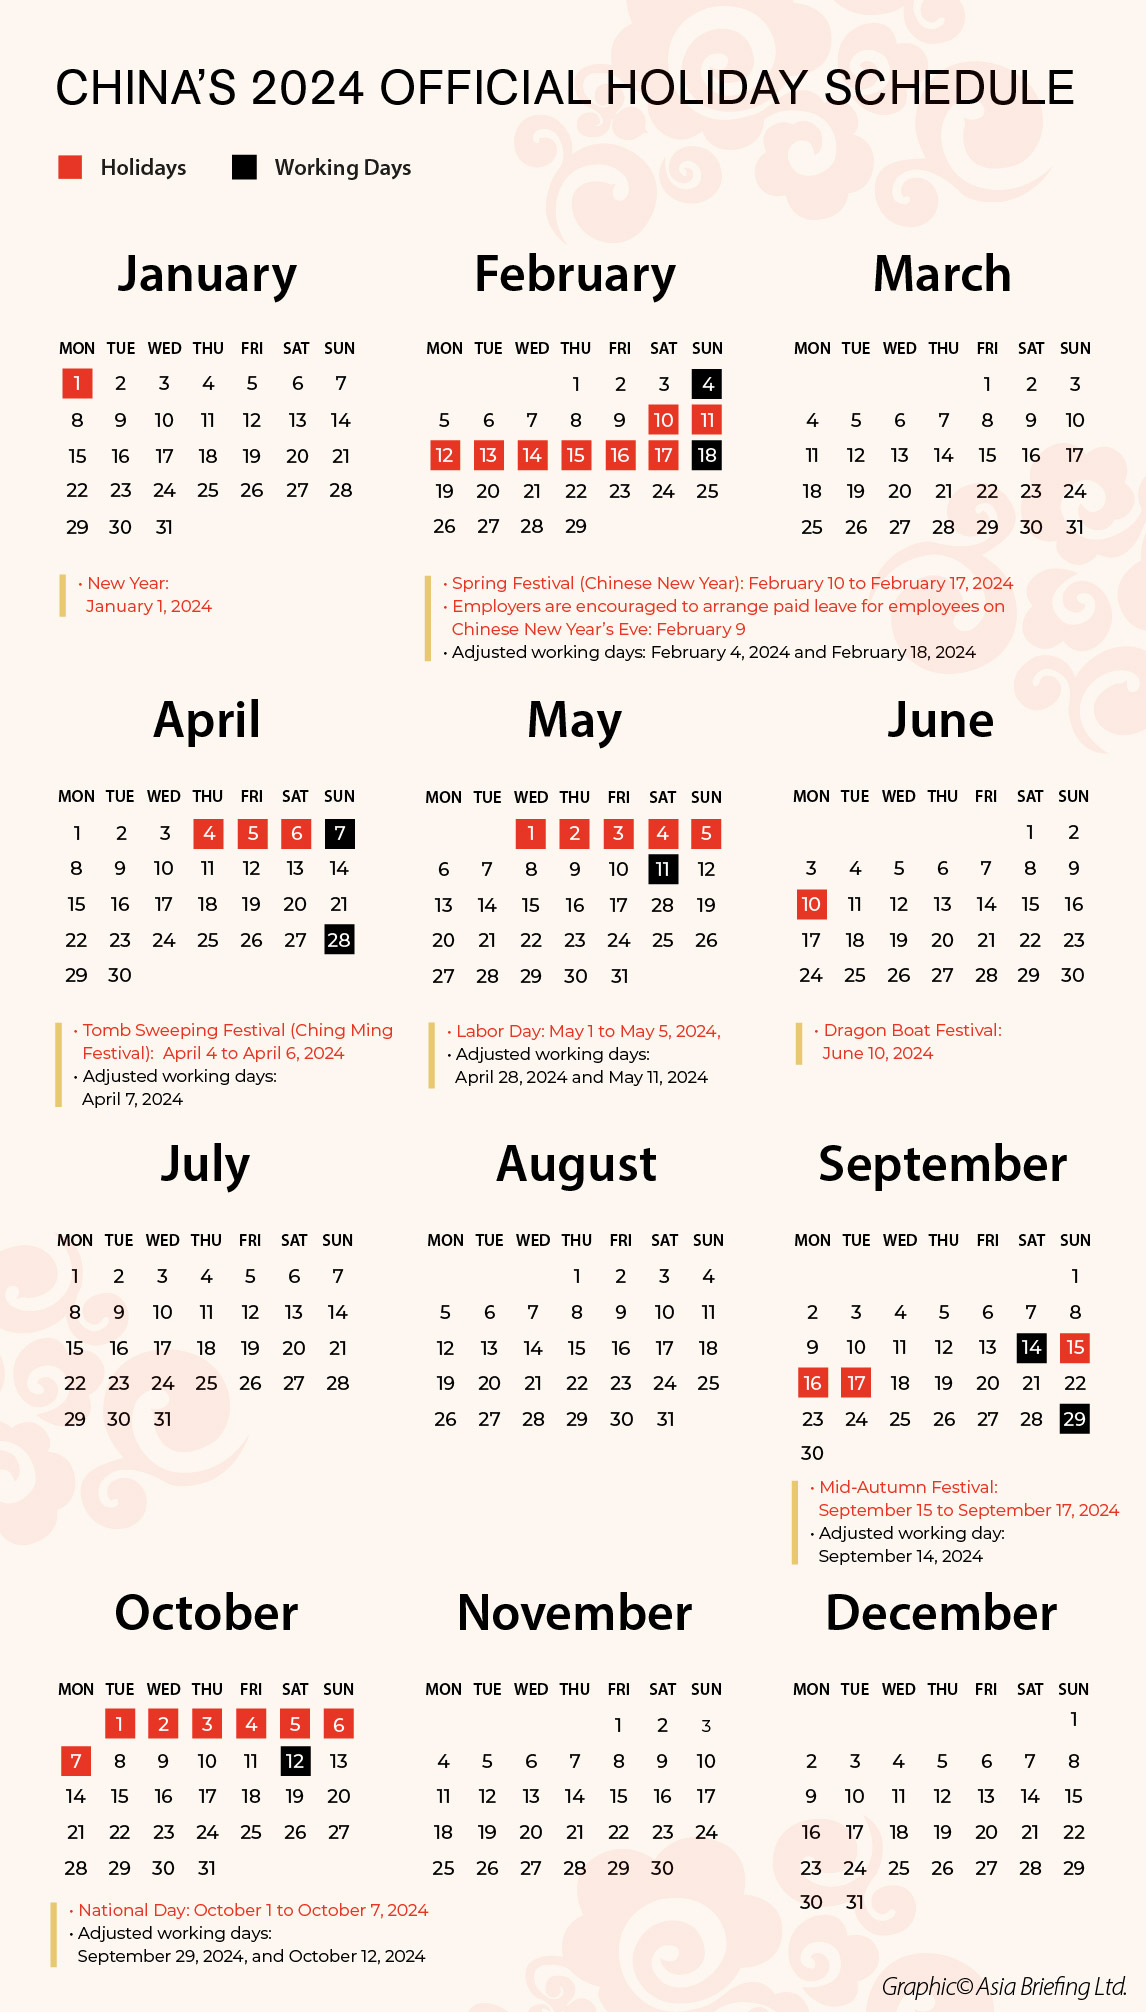 China's 2024 Official Public Holiday Schedule